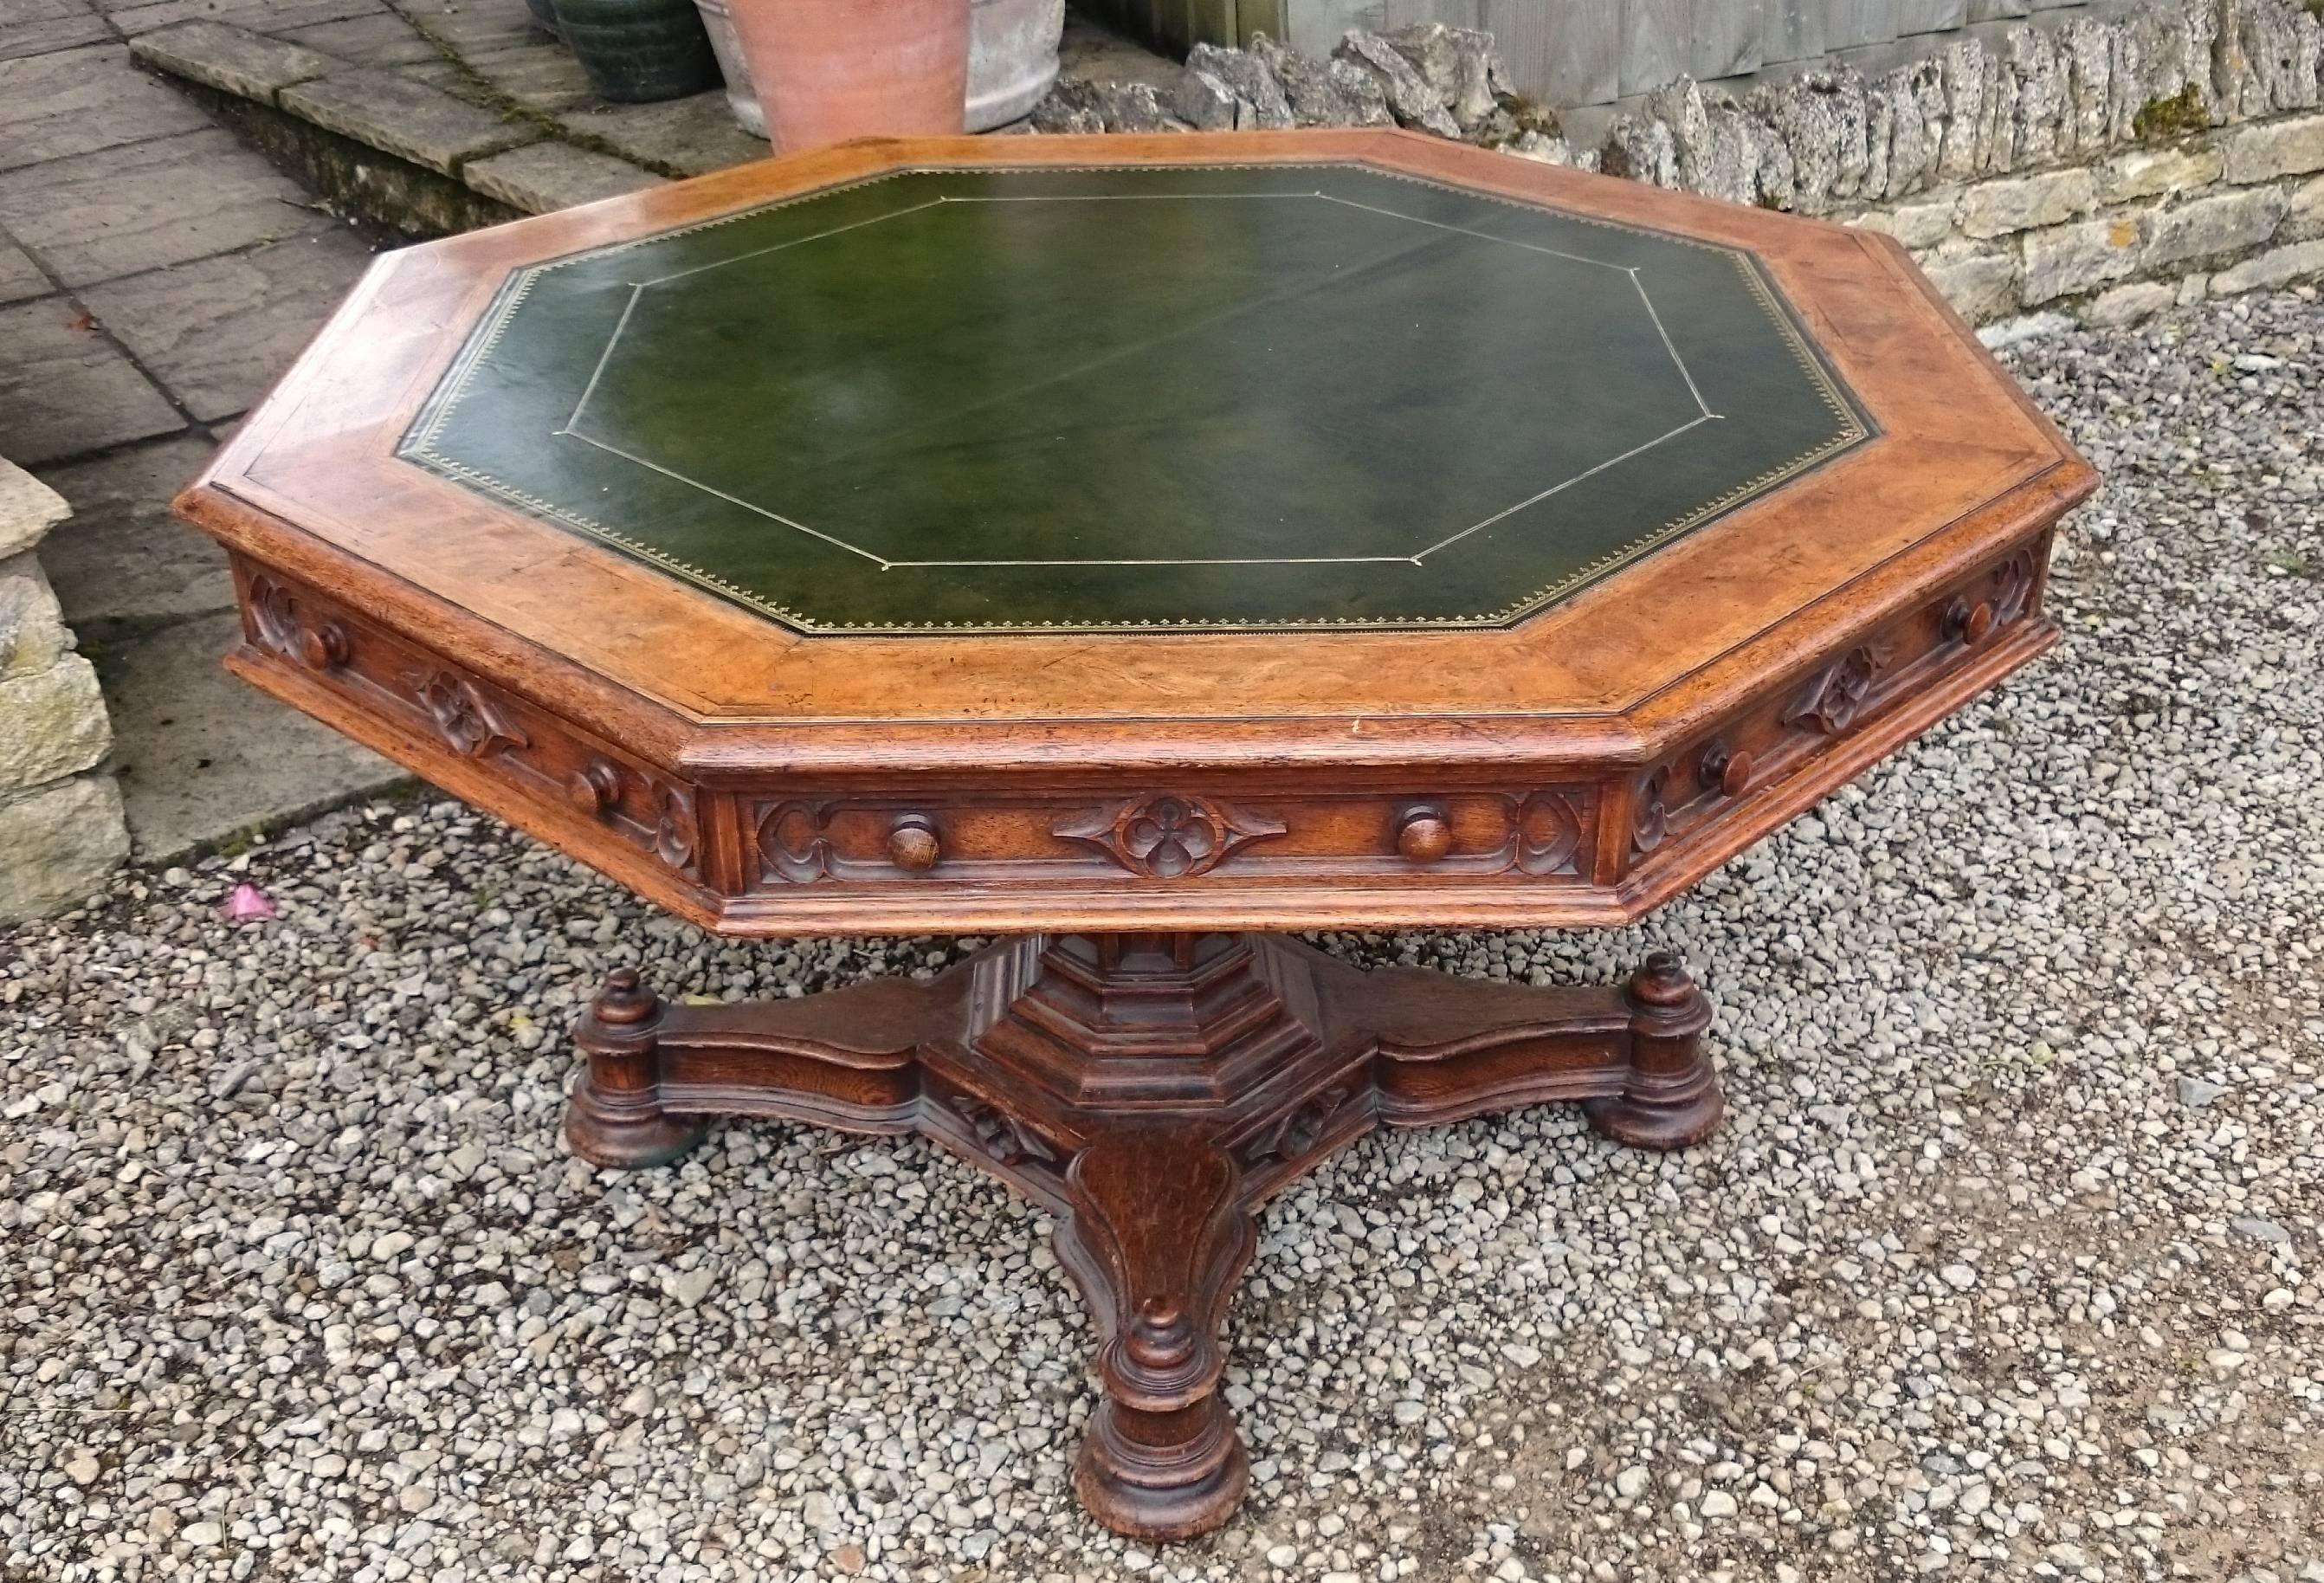 Antique centre table or library table of octagonal form. This table has drawers on four sides which are set into an elegantly thin frieze which allows for plenty of leg room. The oak is top quality with medullary rays in the solid timber and burr